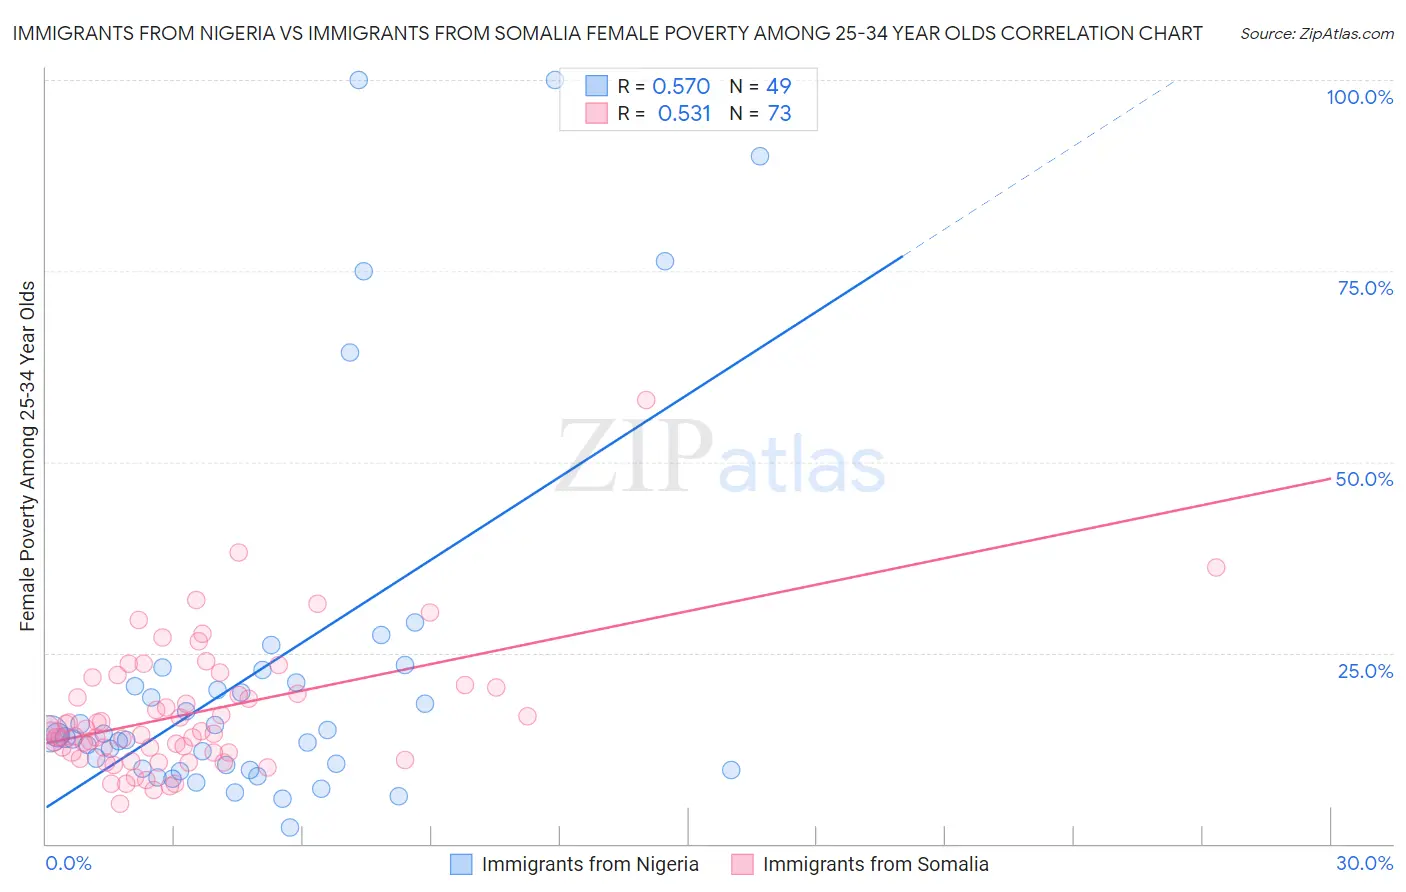 Immigrants from Nigeria vs Immigrants from Somalia Female Poverty Among 25-34 Year Olds